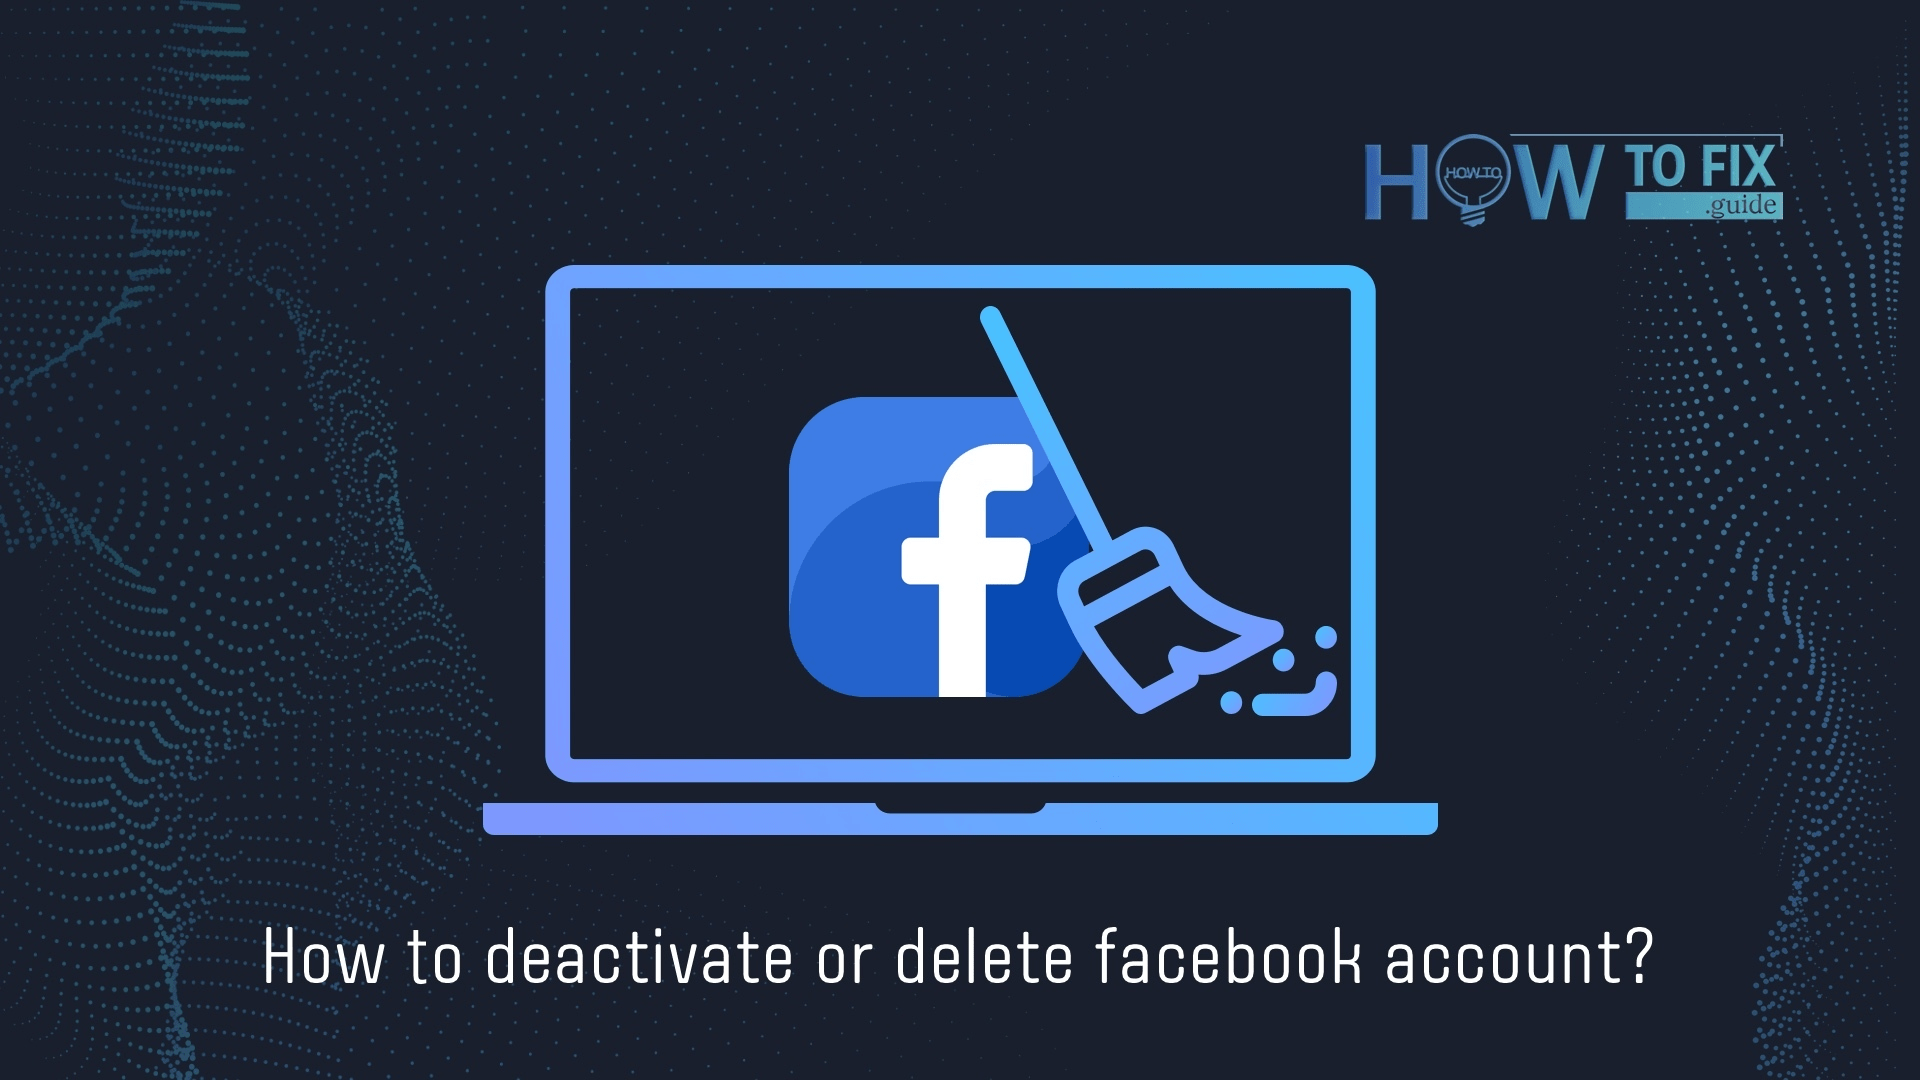 How To Deactivate Or Delete Facebook Account